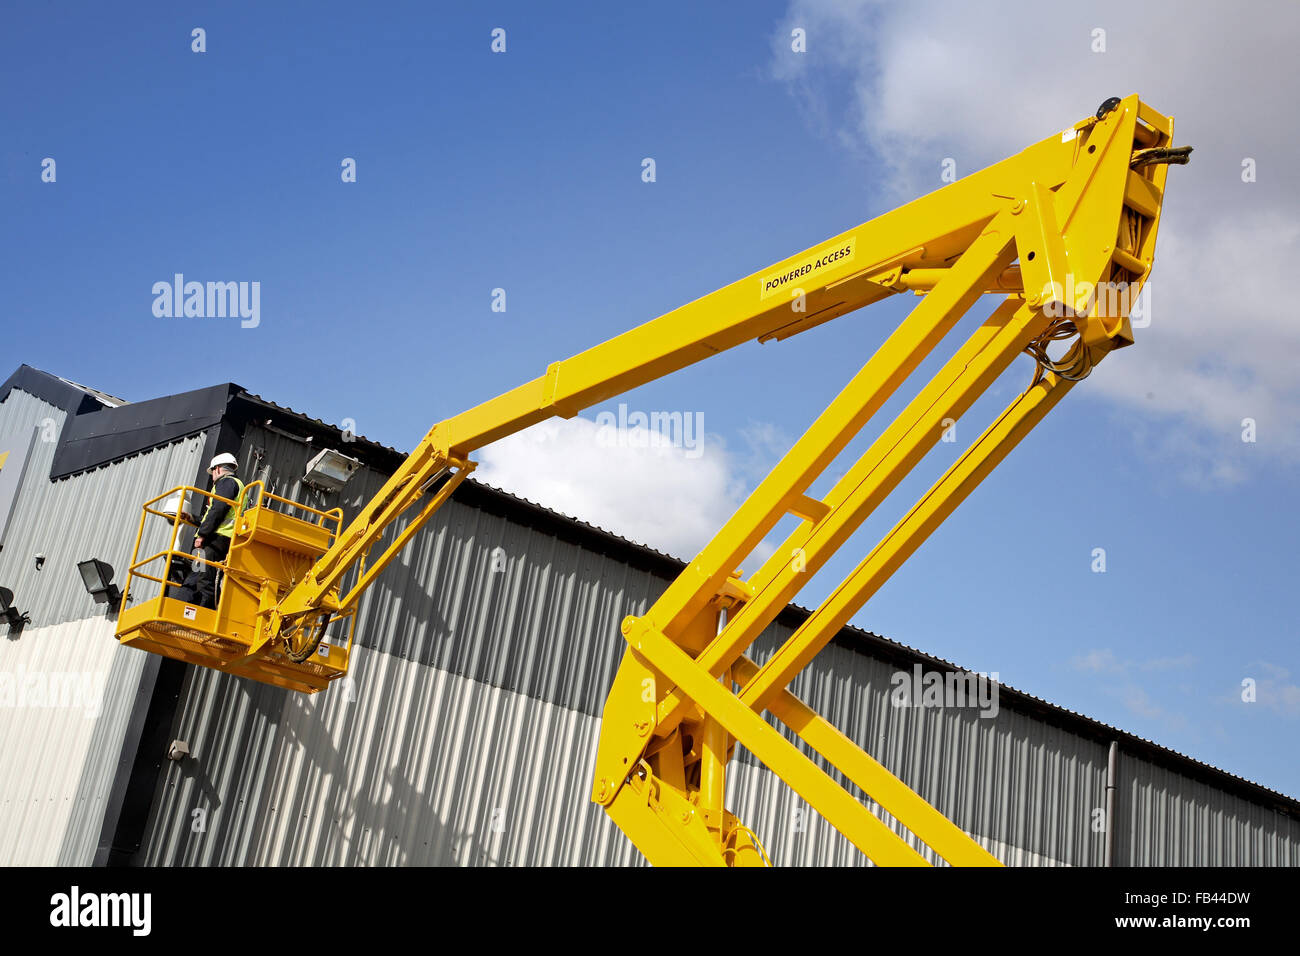 A hydraulic, powered access machine is used to access the exterior of a warehouse building Stock Photo